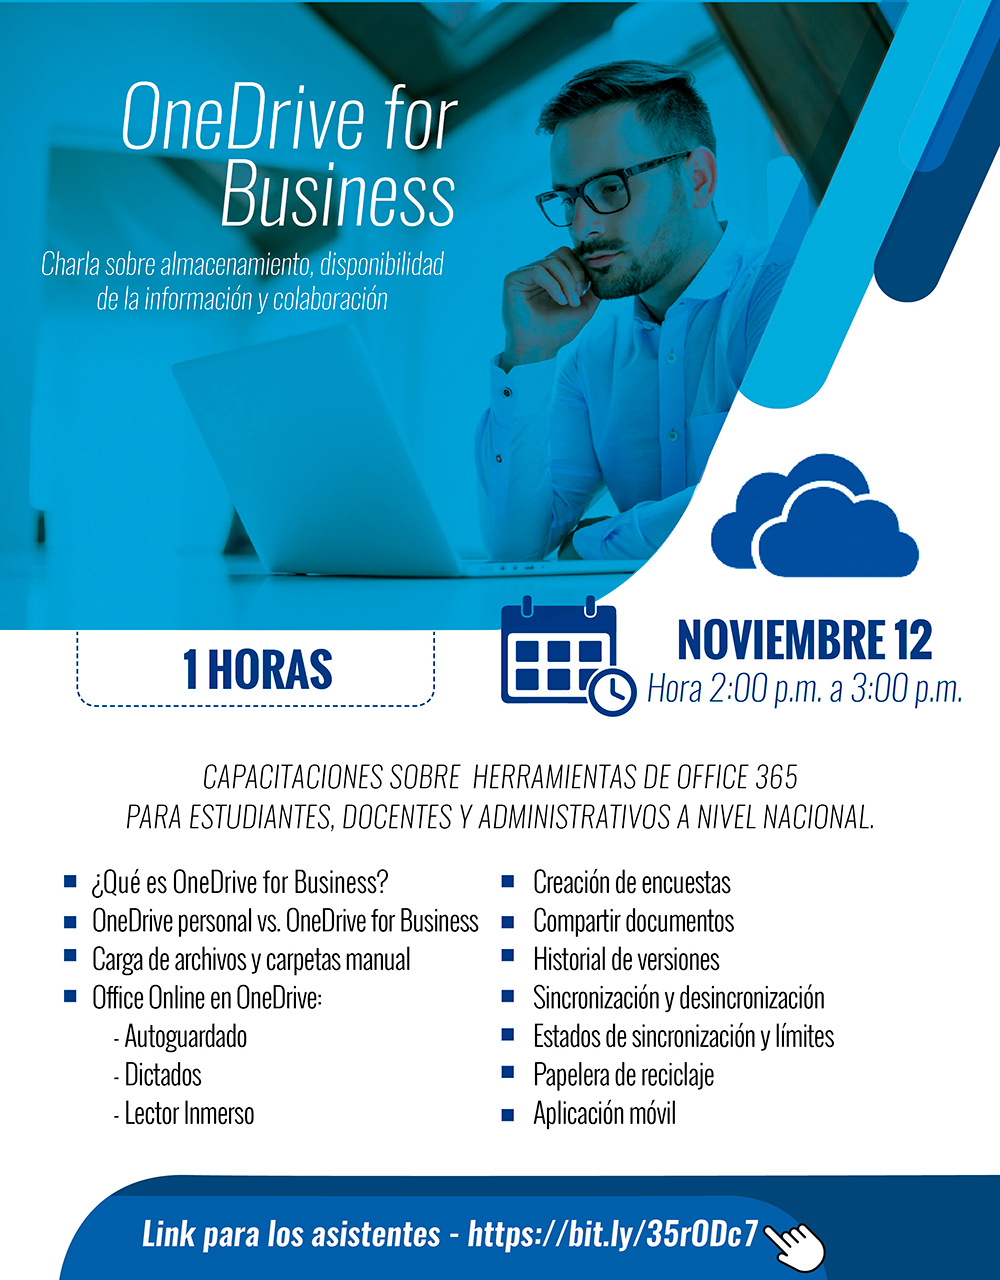 Charla sobre OneDrive for Business